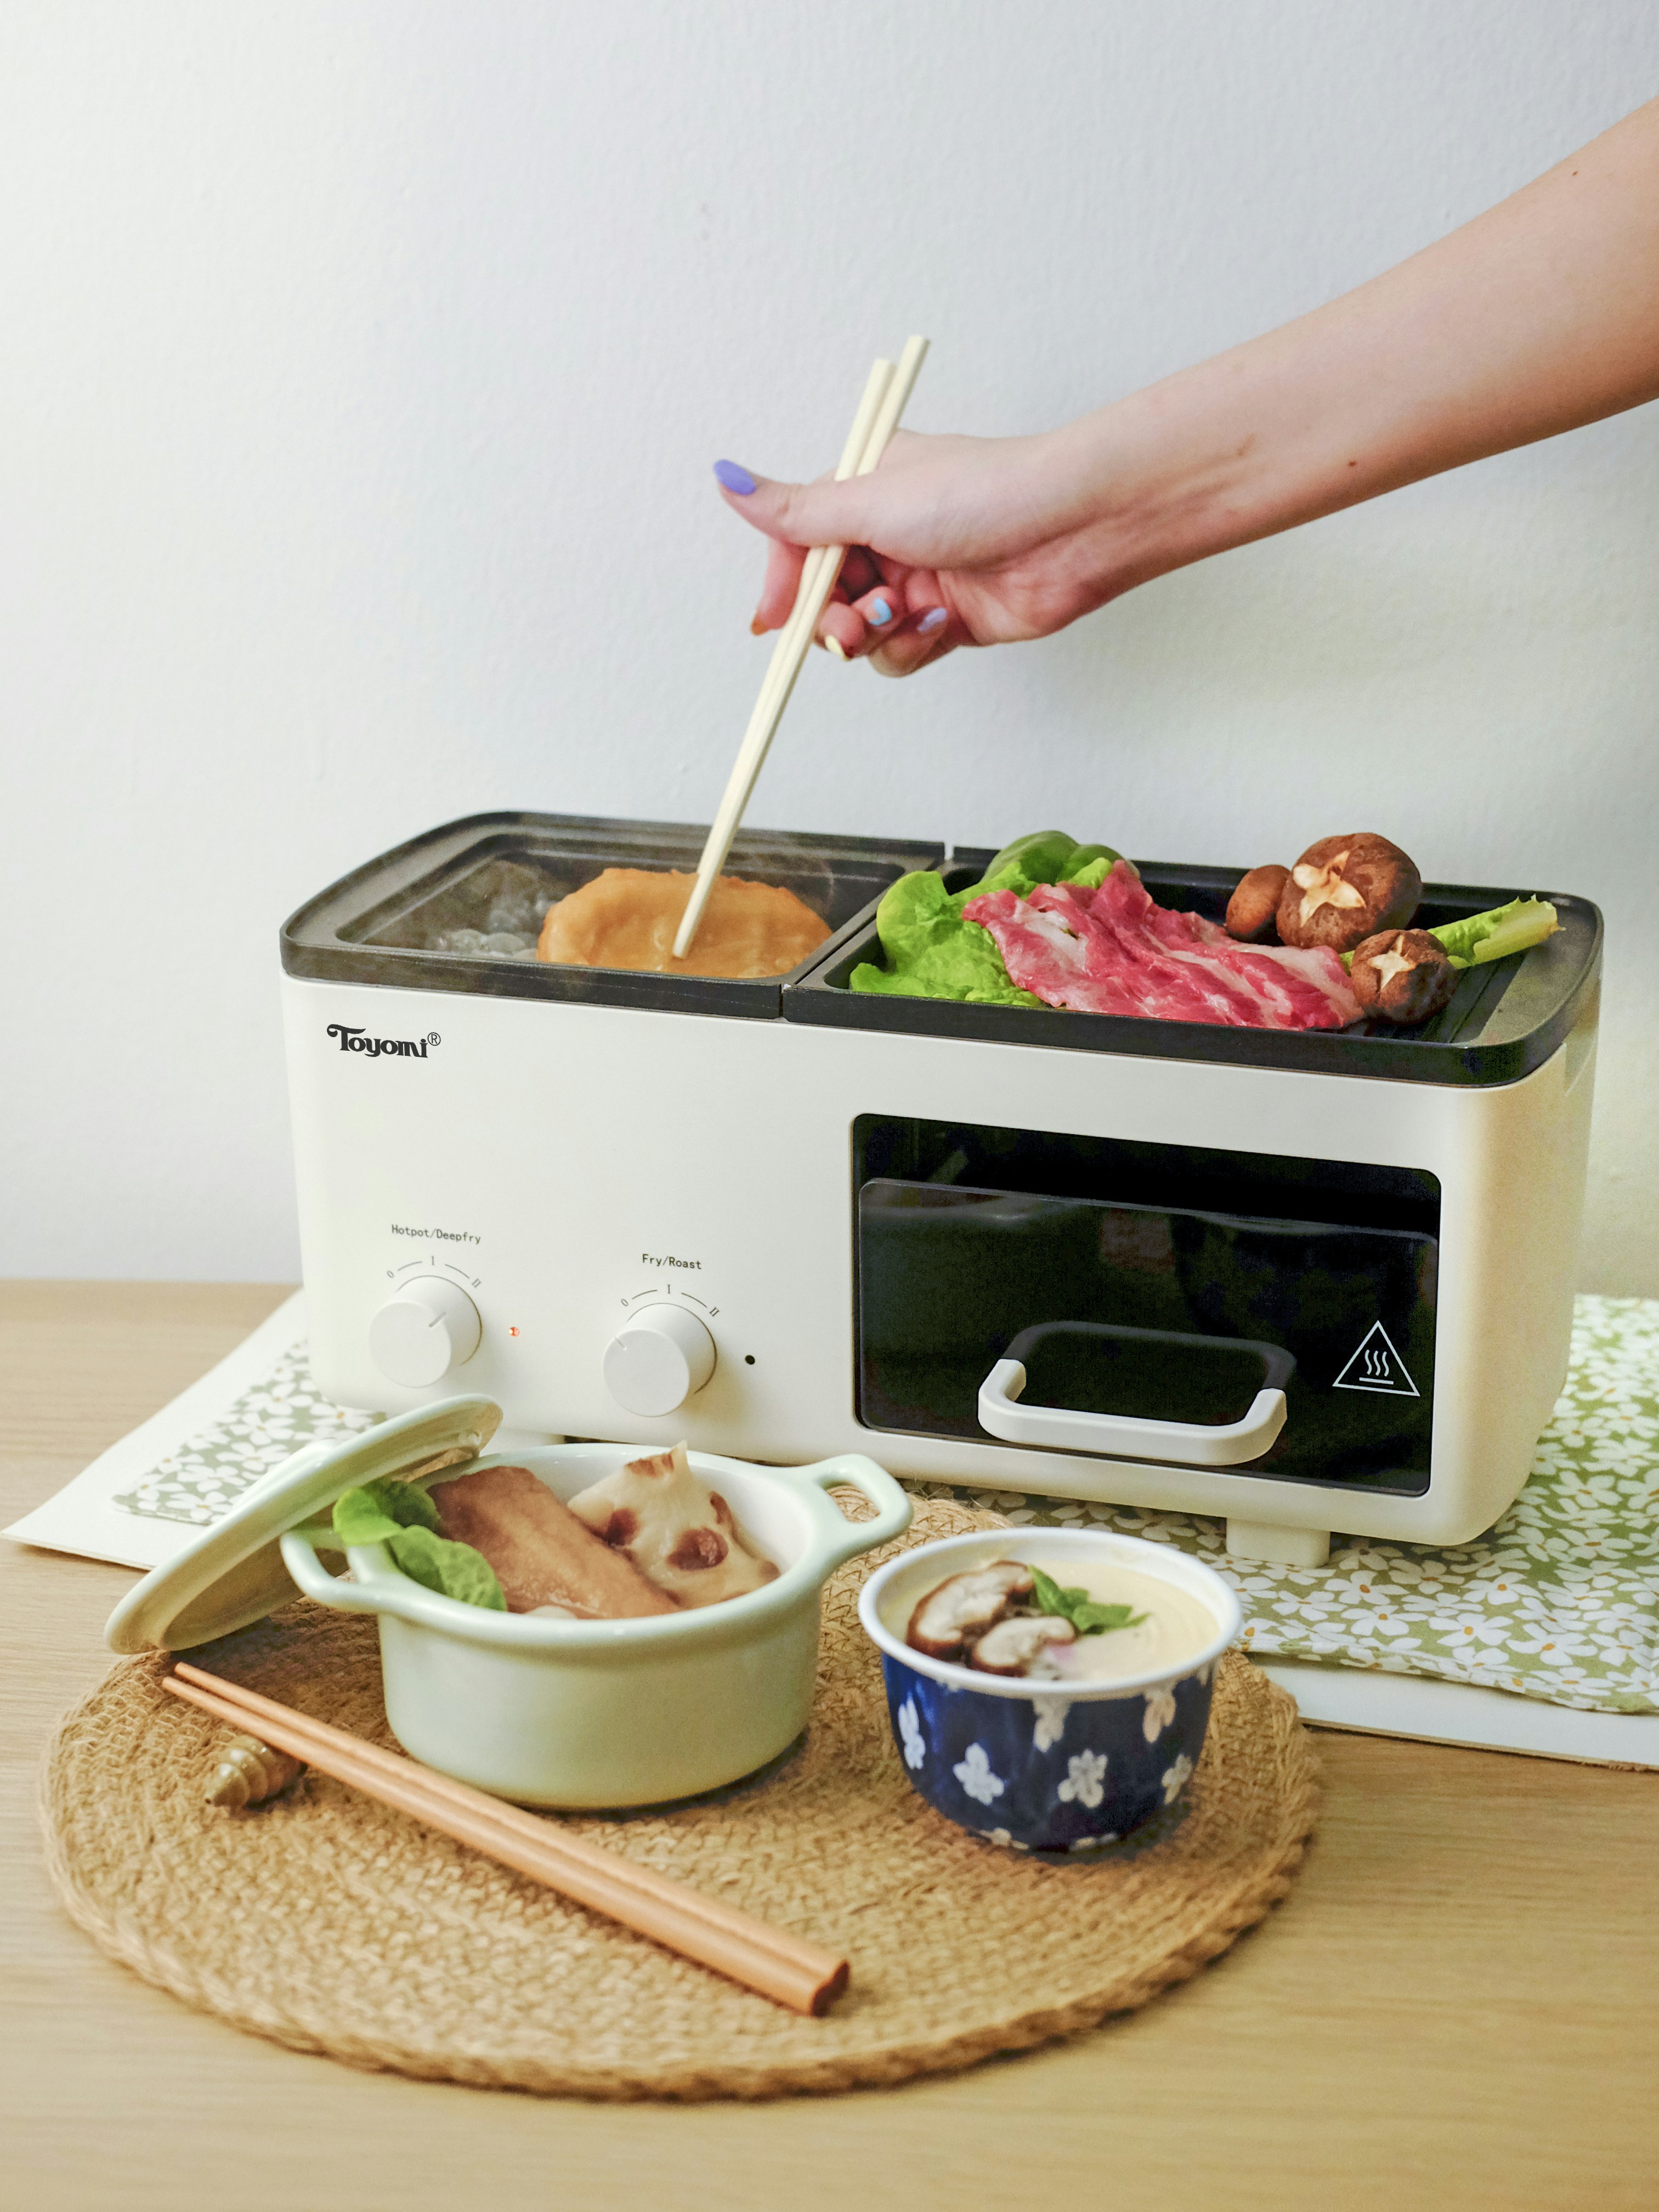 toyomi travel cooker review